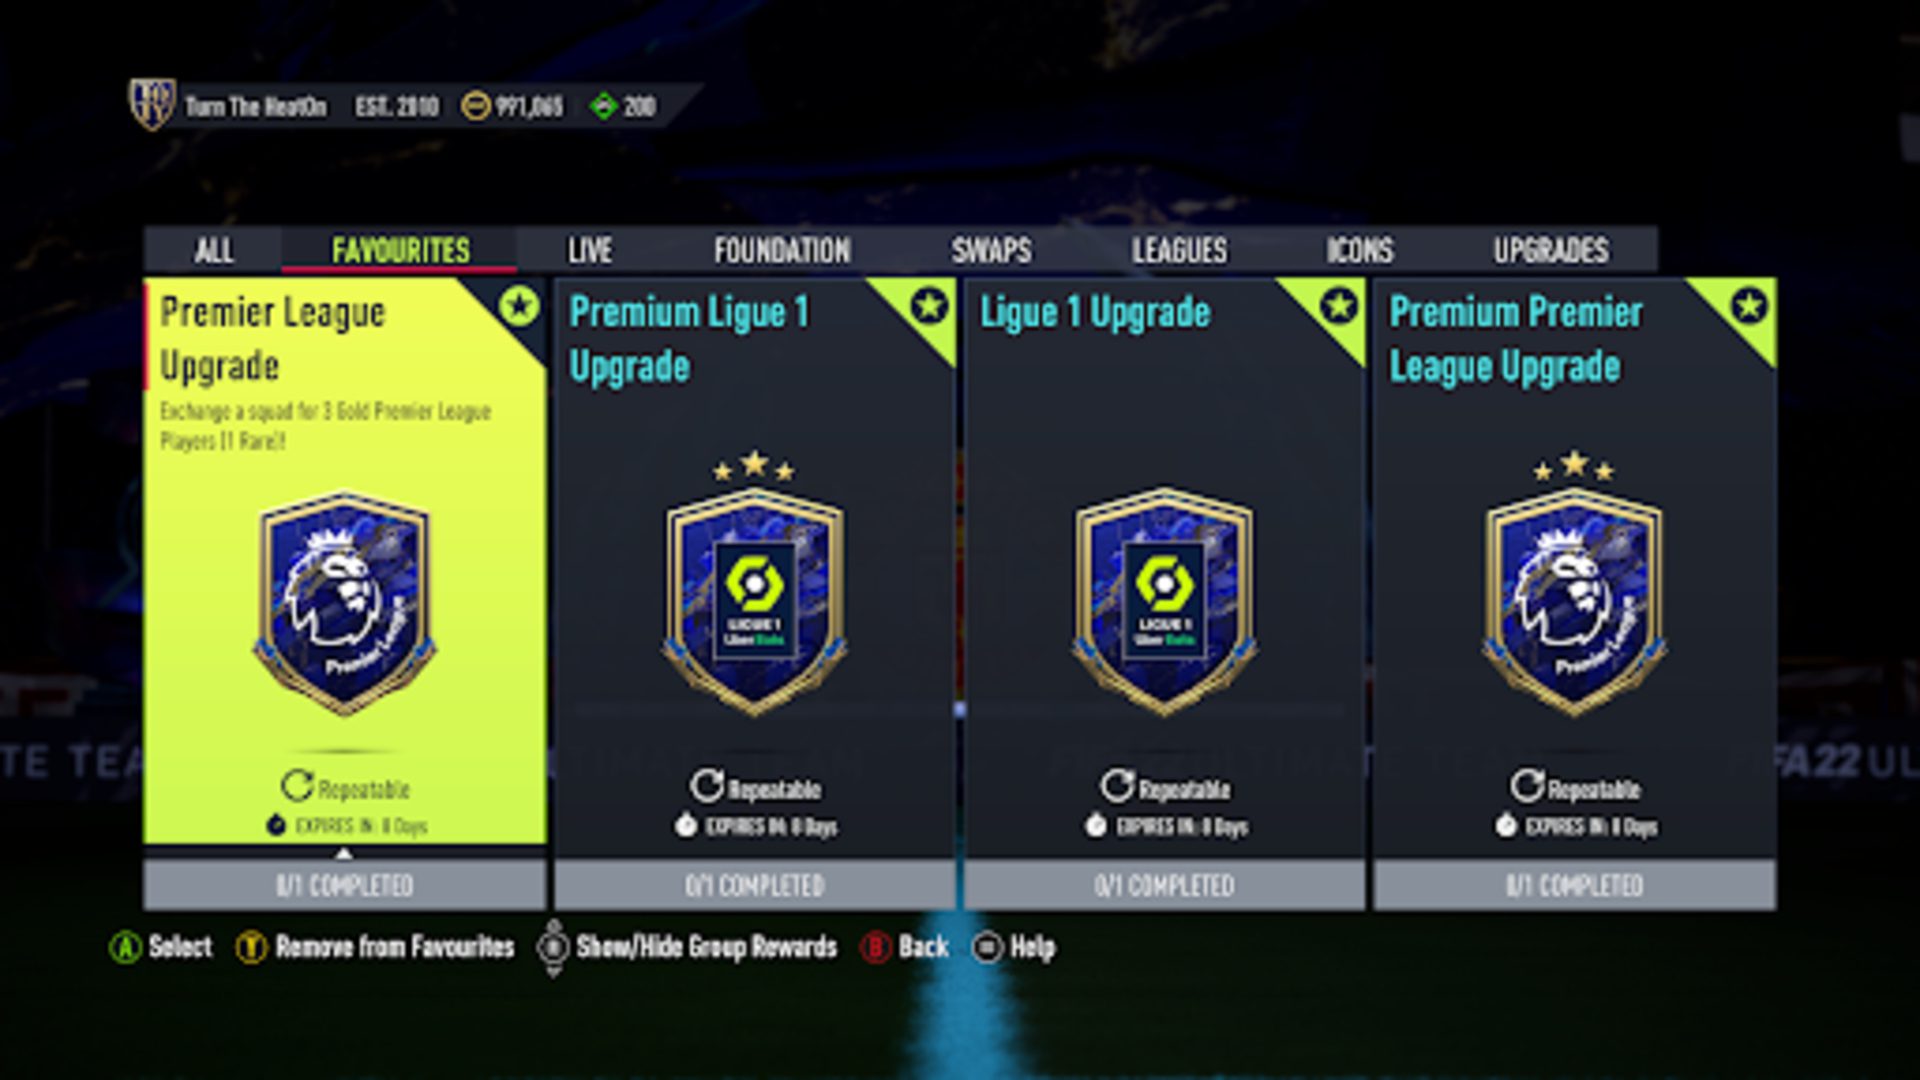 TOTY Gianluigi Donnarumma shows his face from an upgrade pack.